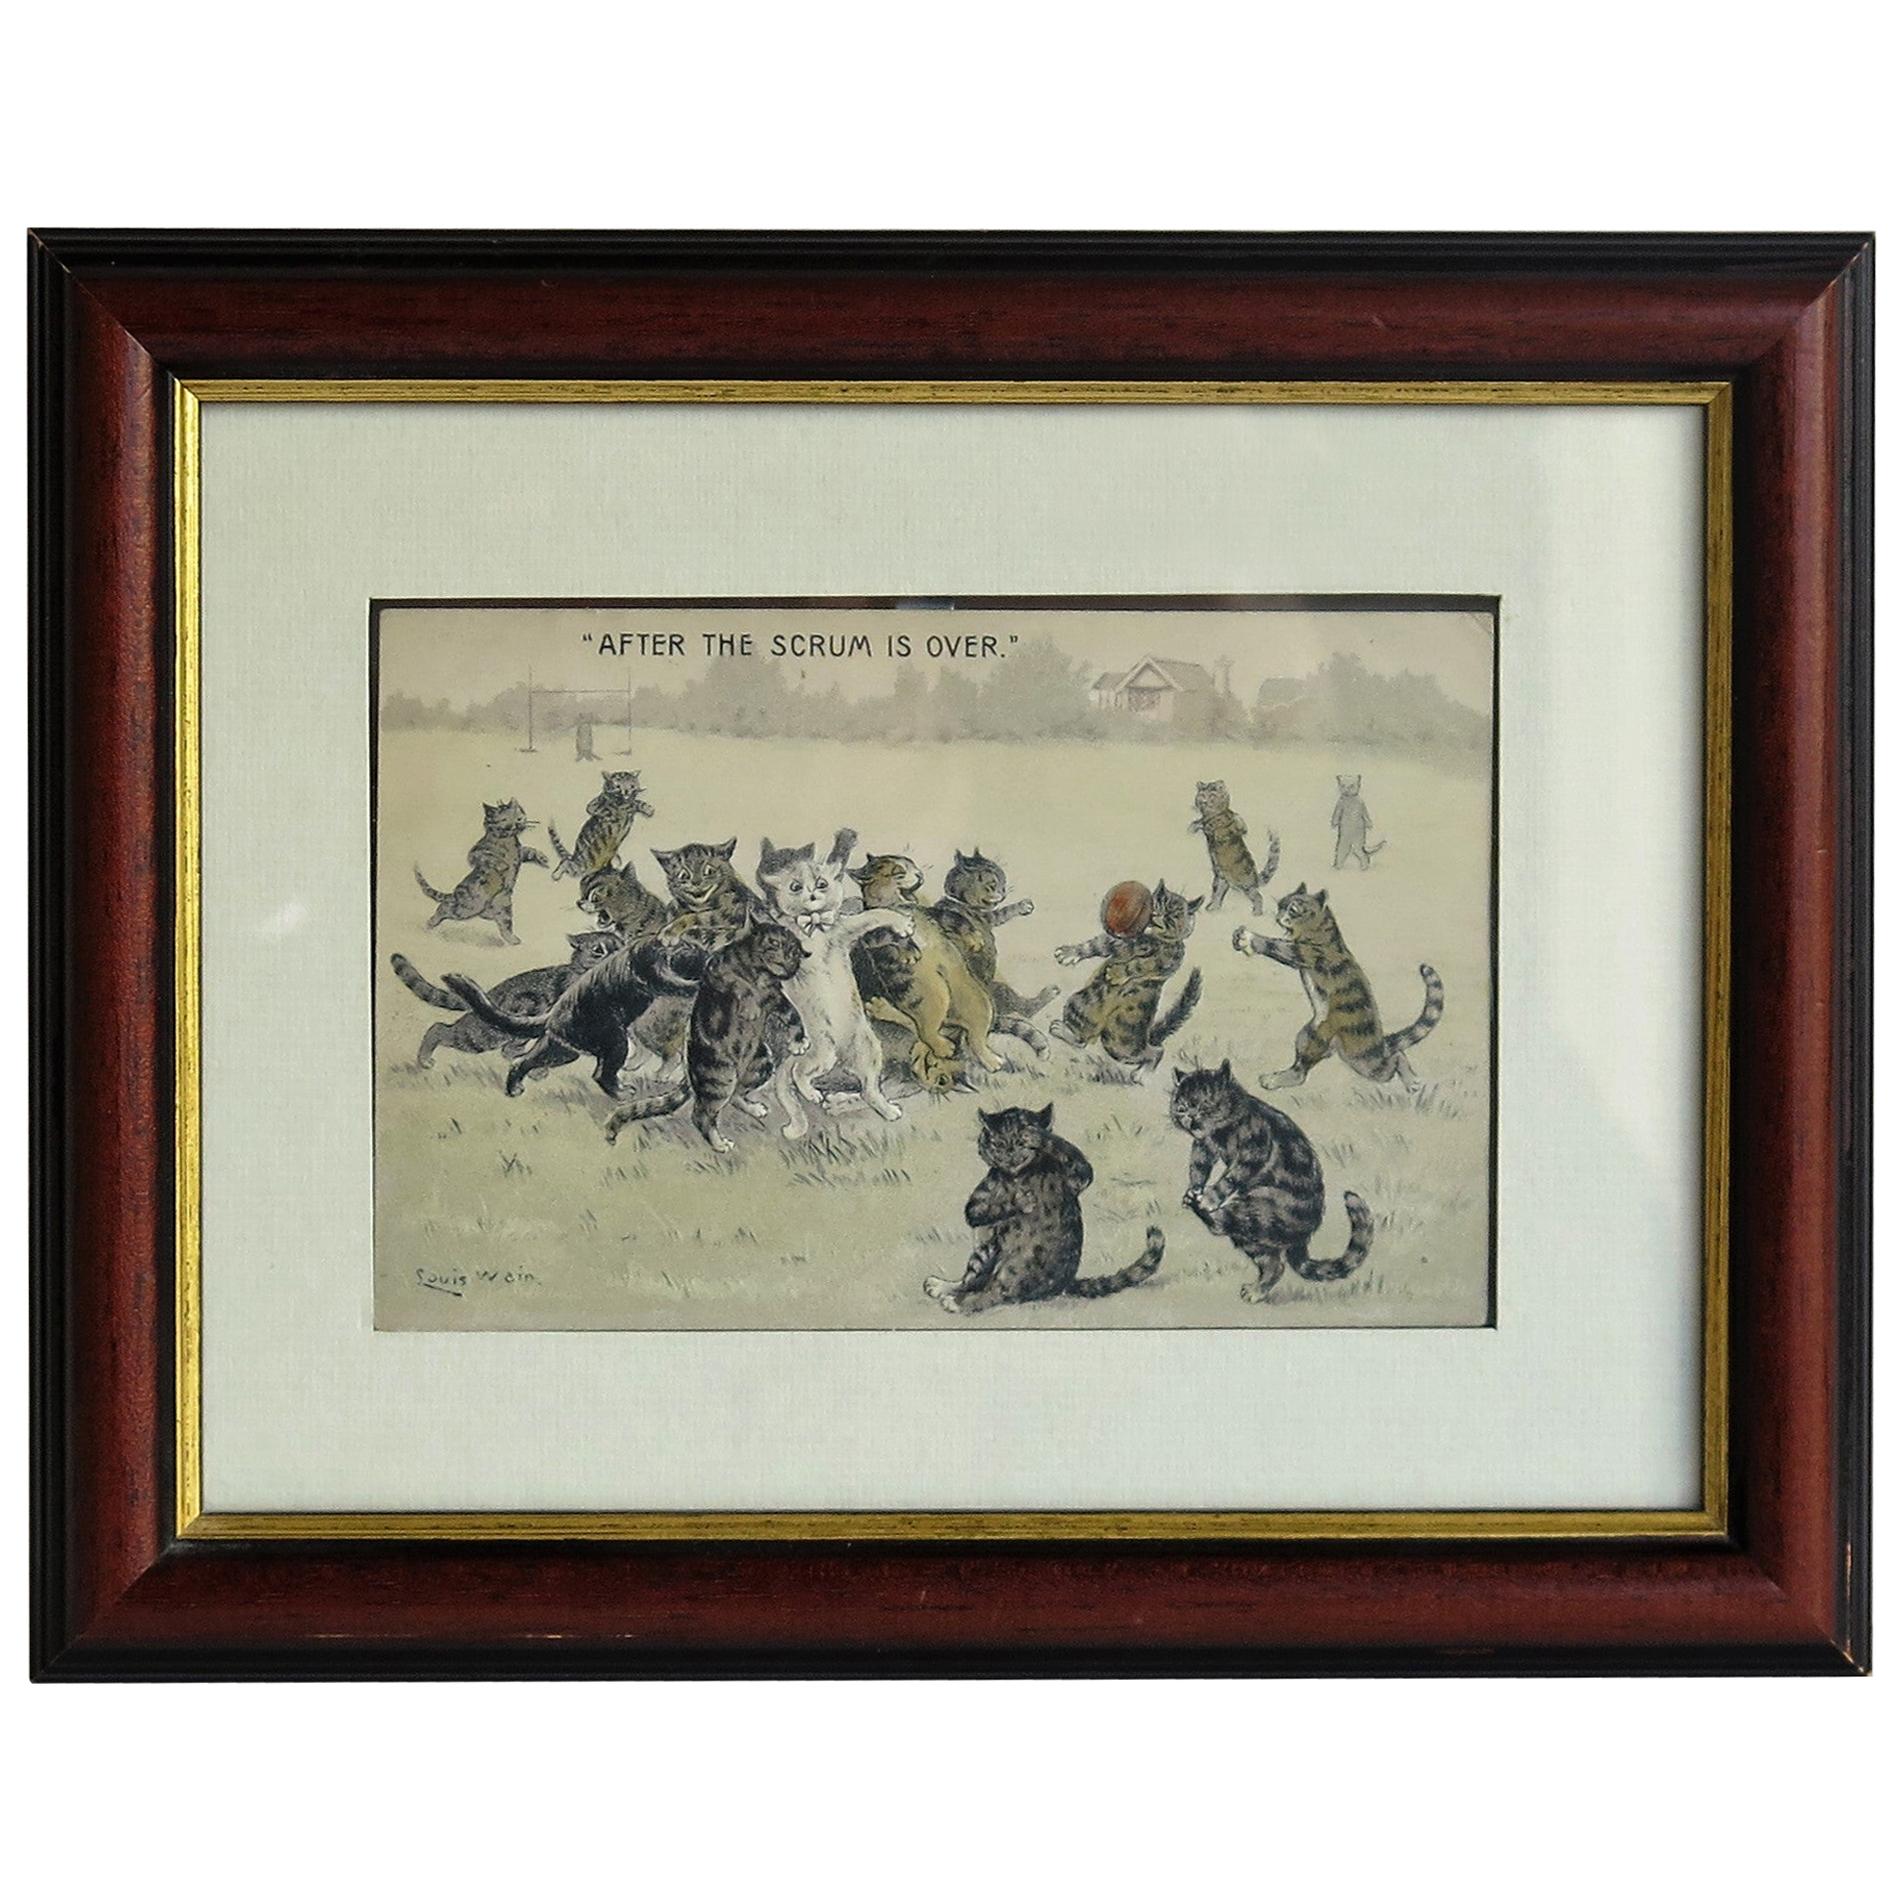 Edwardian Louis Wain Framed Cat Postcard "After The Scrum is Over", circa 1900